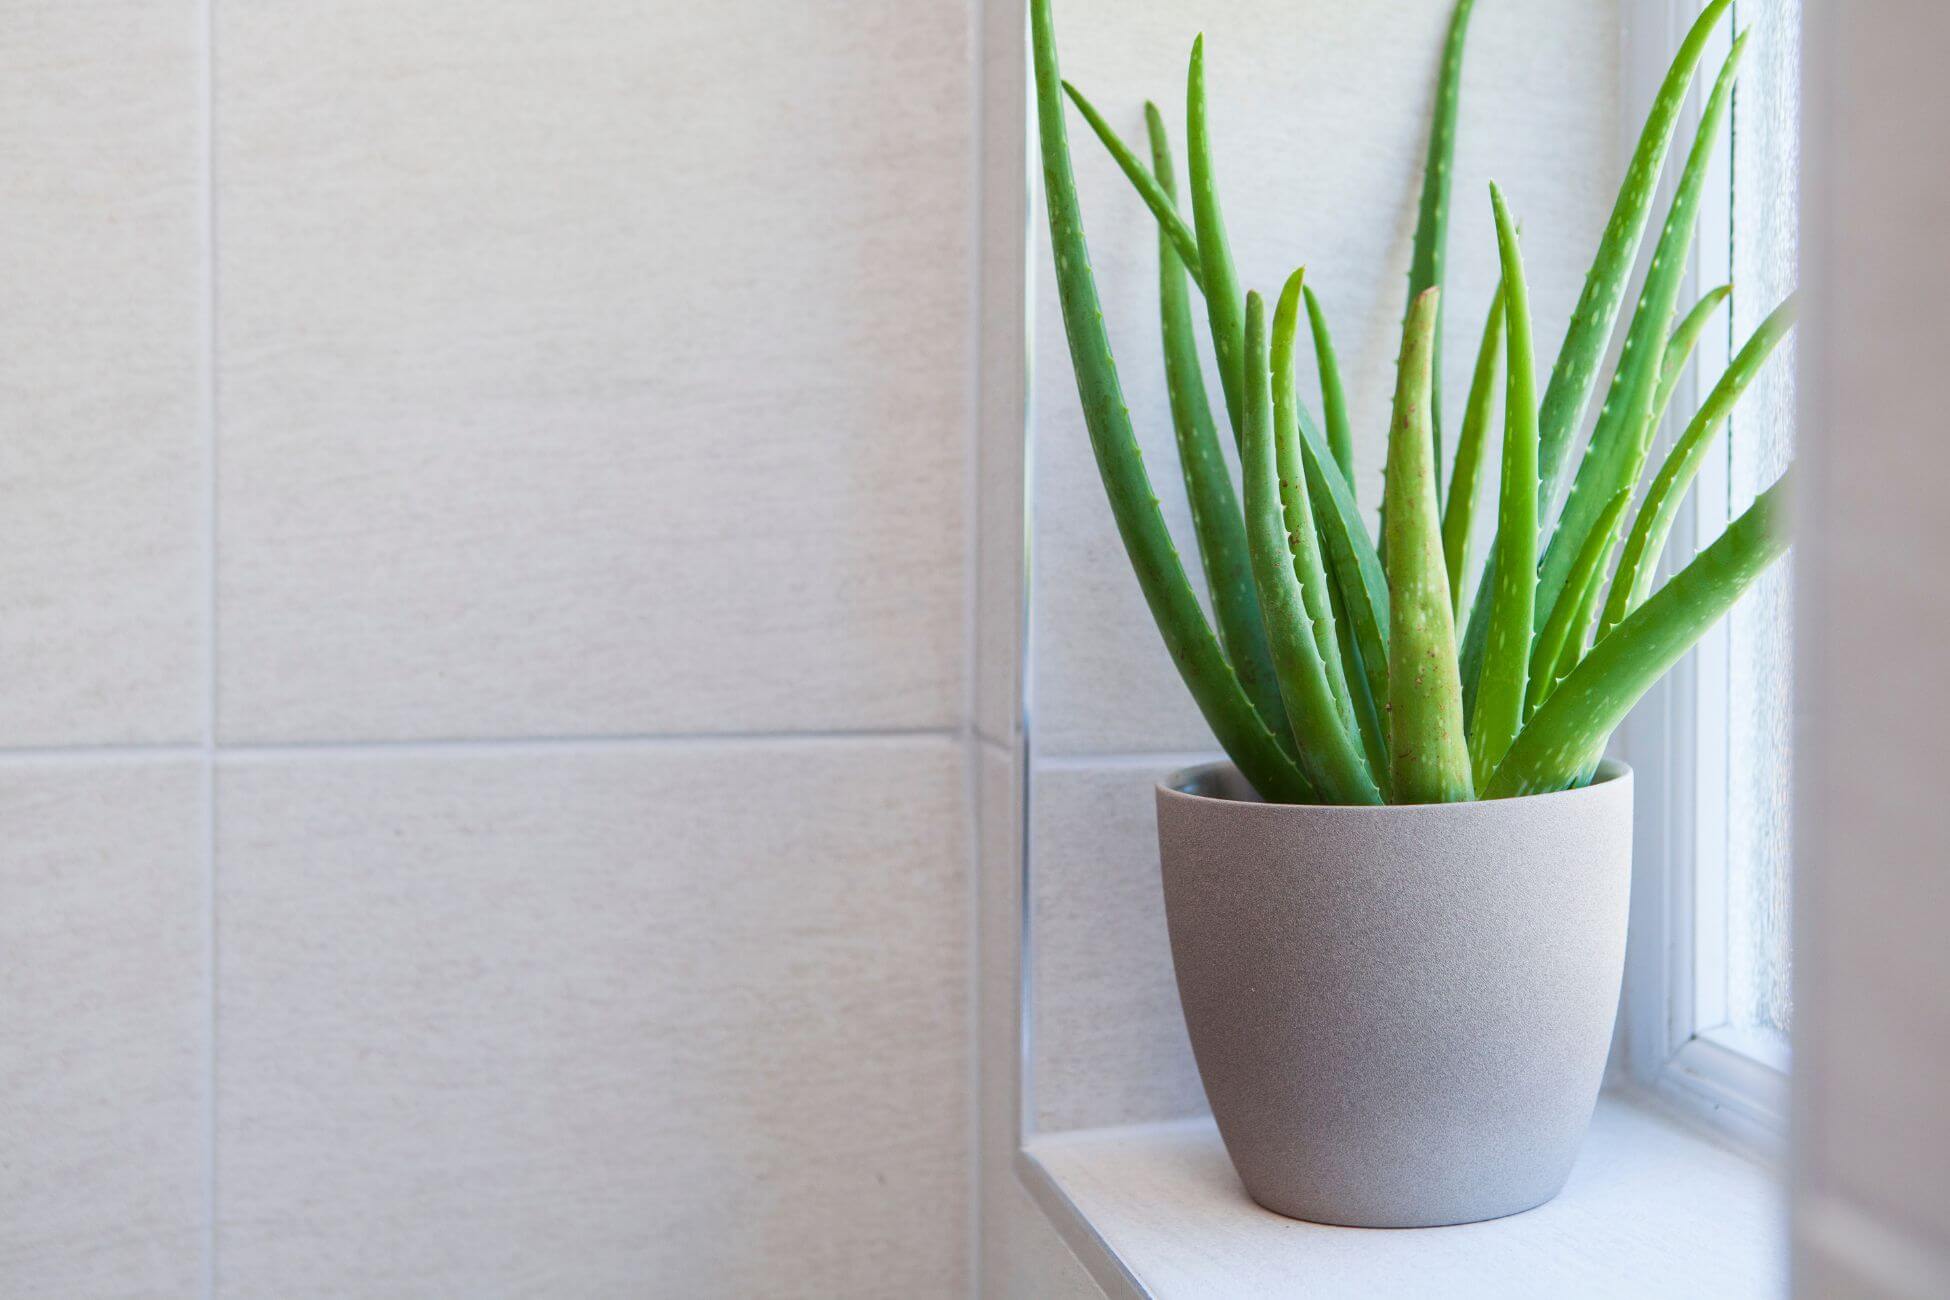 A potted aloe vera plant with long, green, spiky leaves sits on a window sill. 